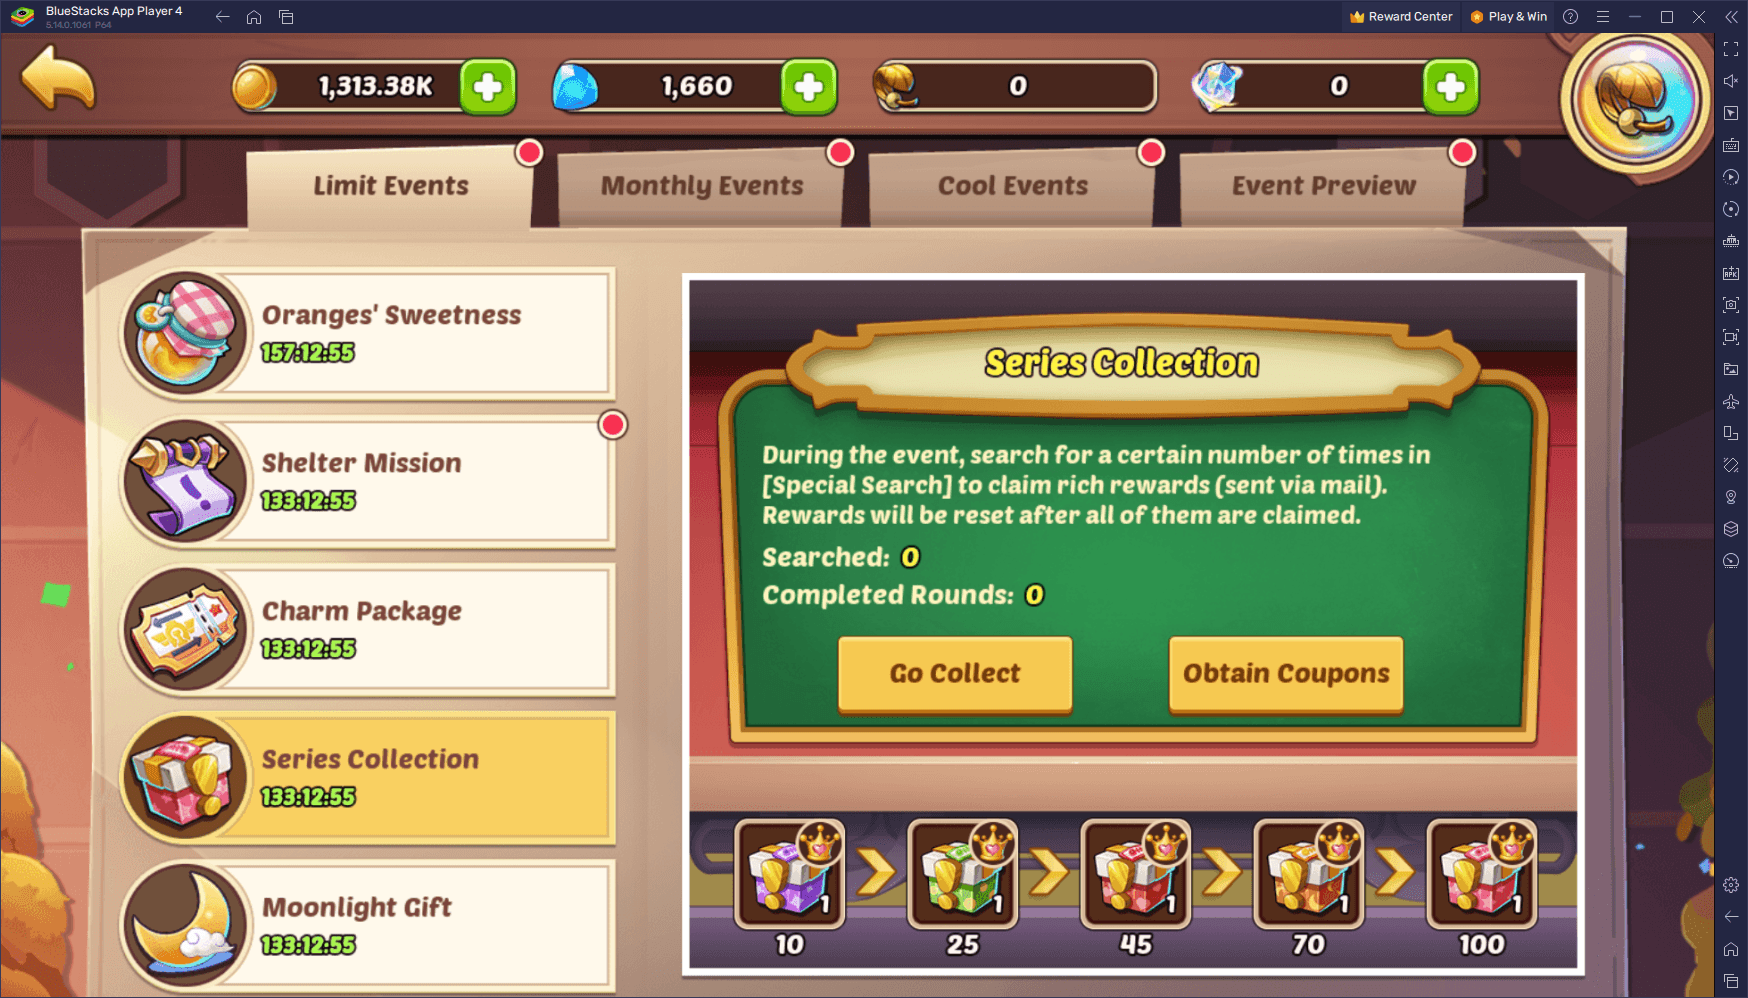 Idle Heroes Update Event - Daily Rewards, Missions, and More!